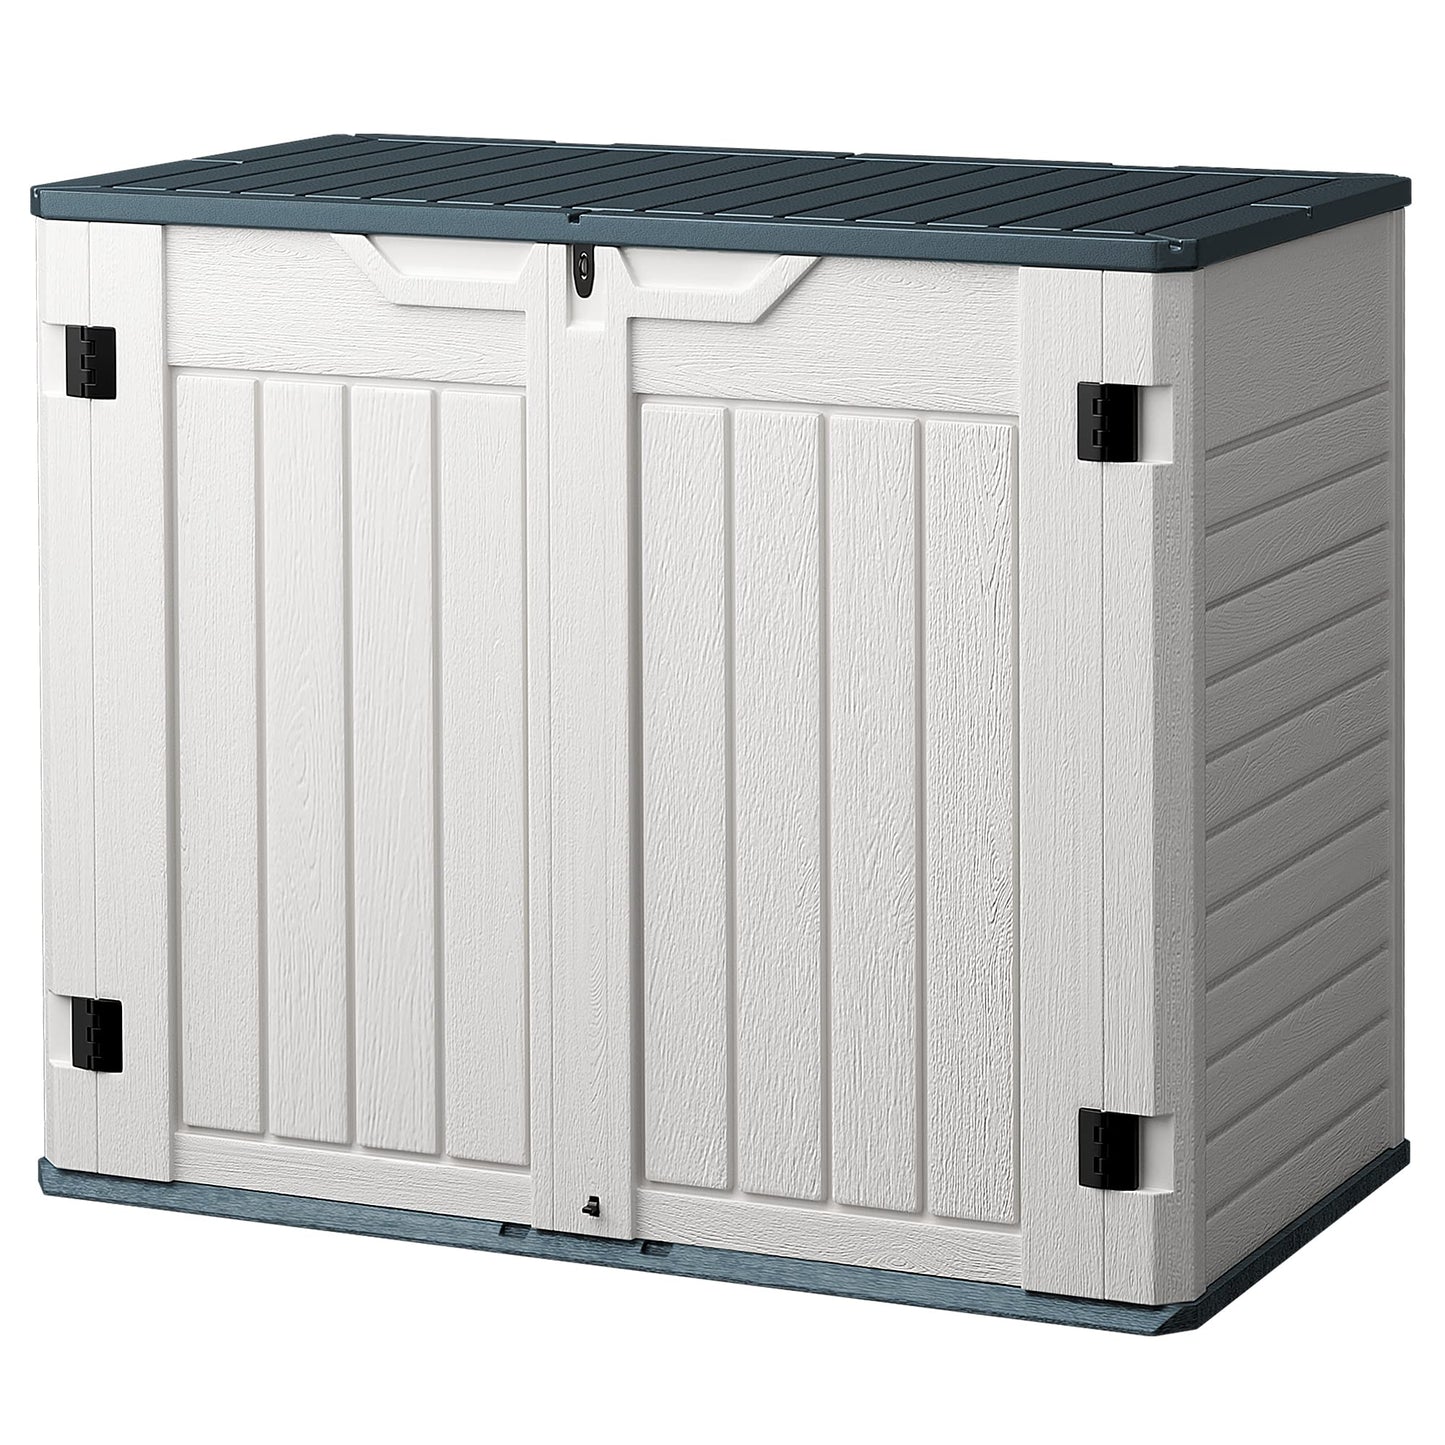 Homall Resin Outdoor Storage Shed 28 Cu Ft Horizontal Outdoor Storage Cabinet, Weather Resistant Resin Tool Shed, Multi-Purpose Shed Lockable Outdoor